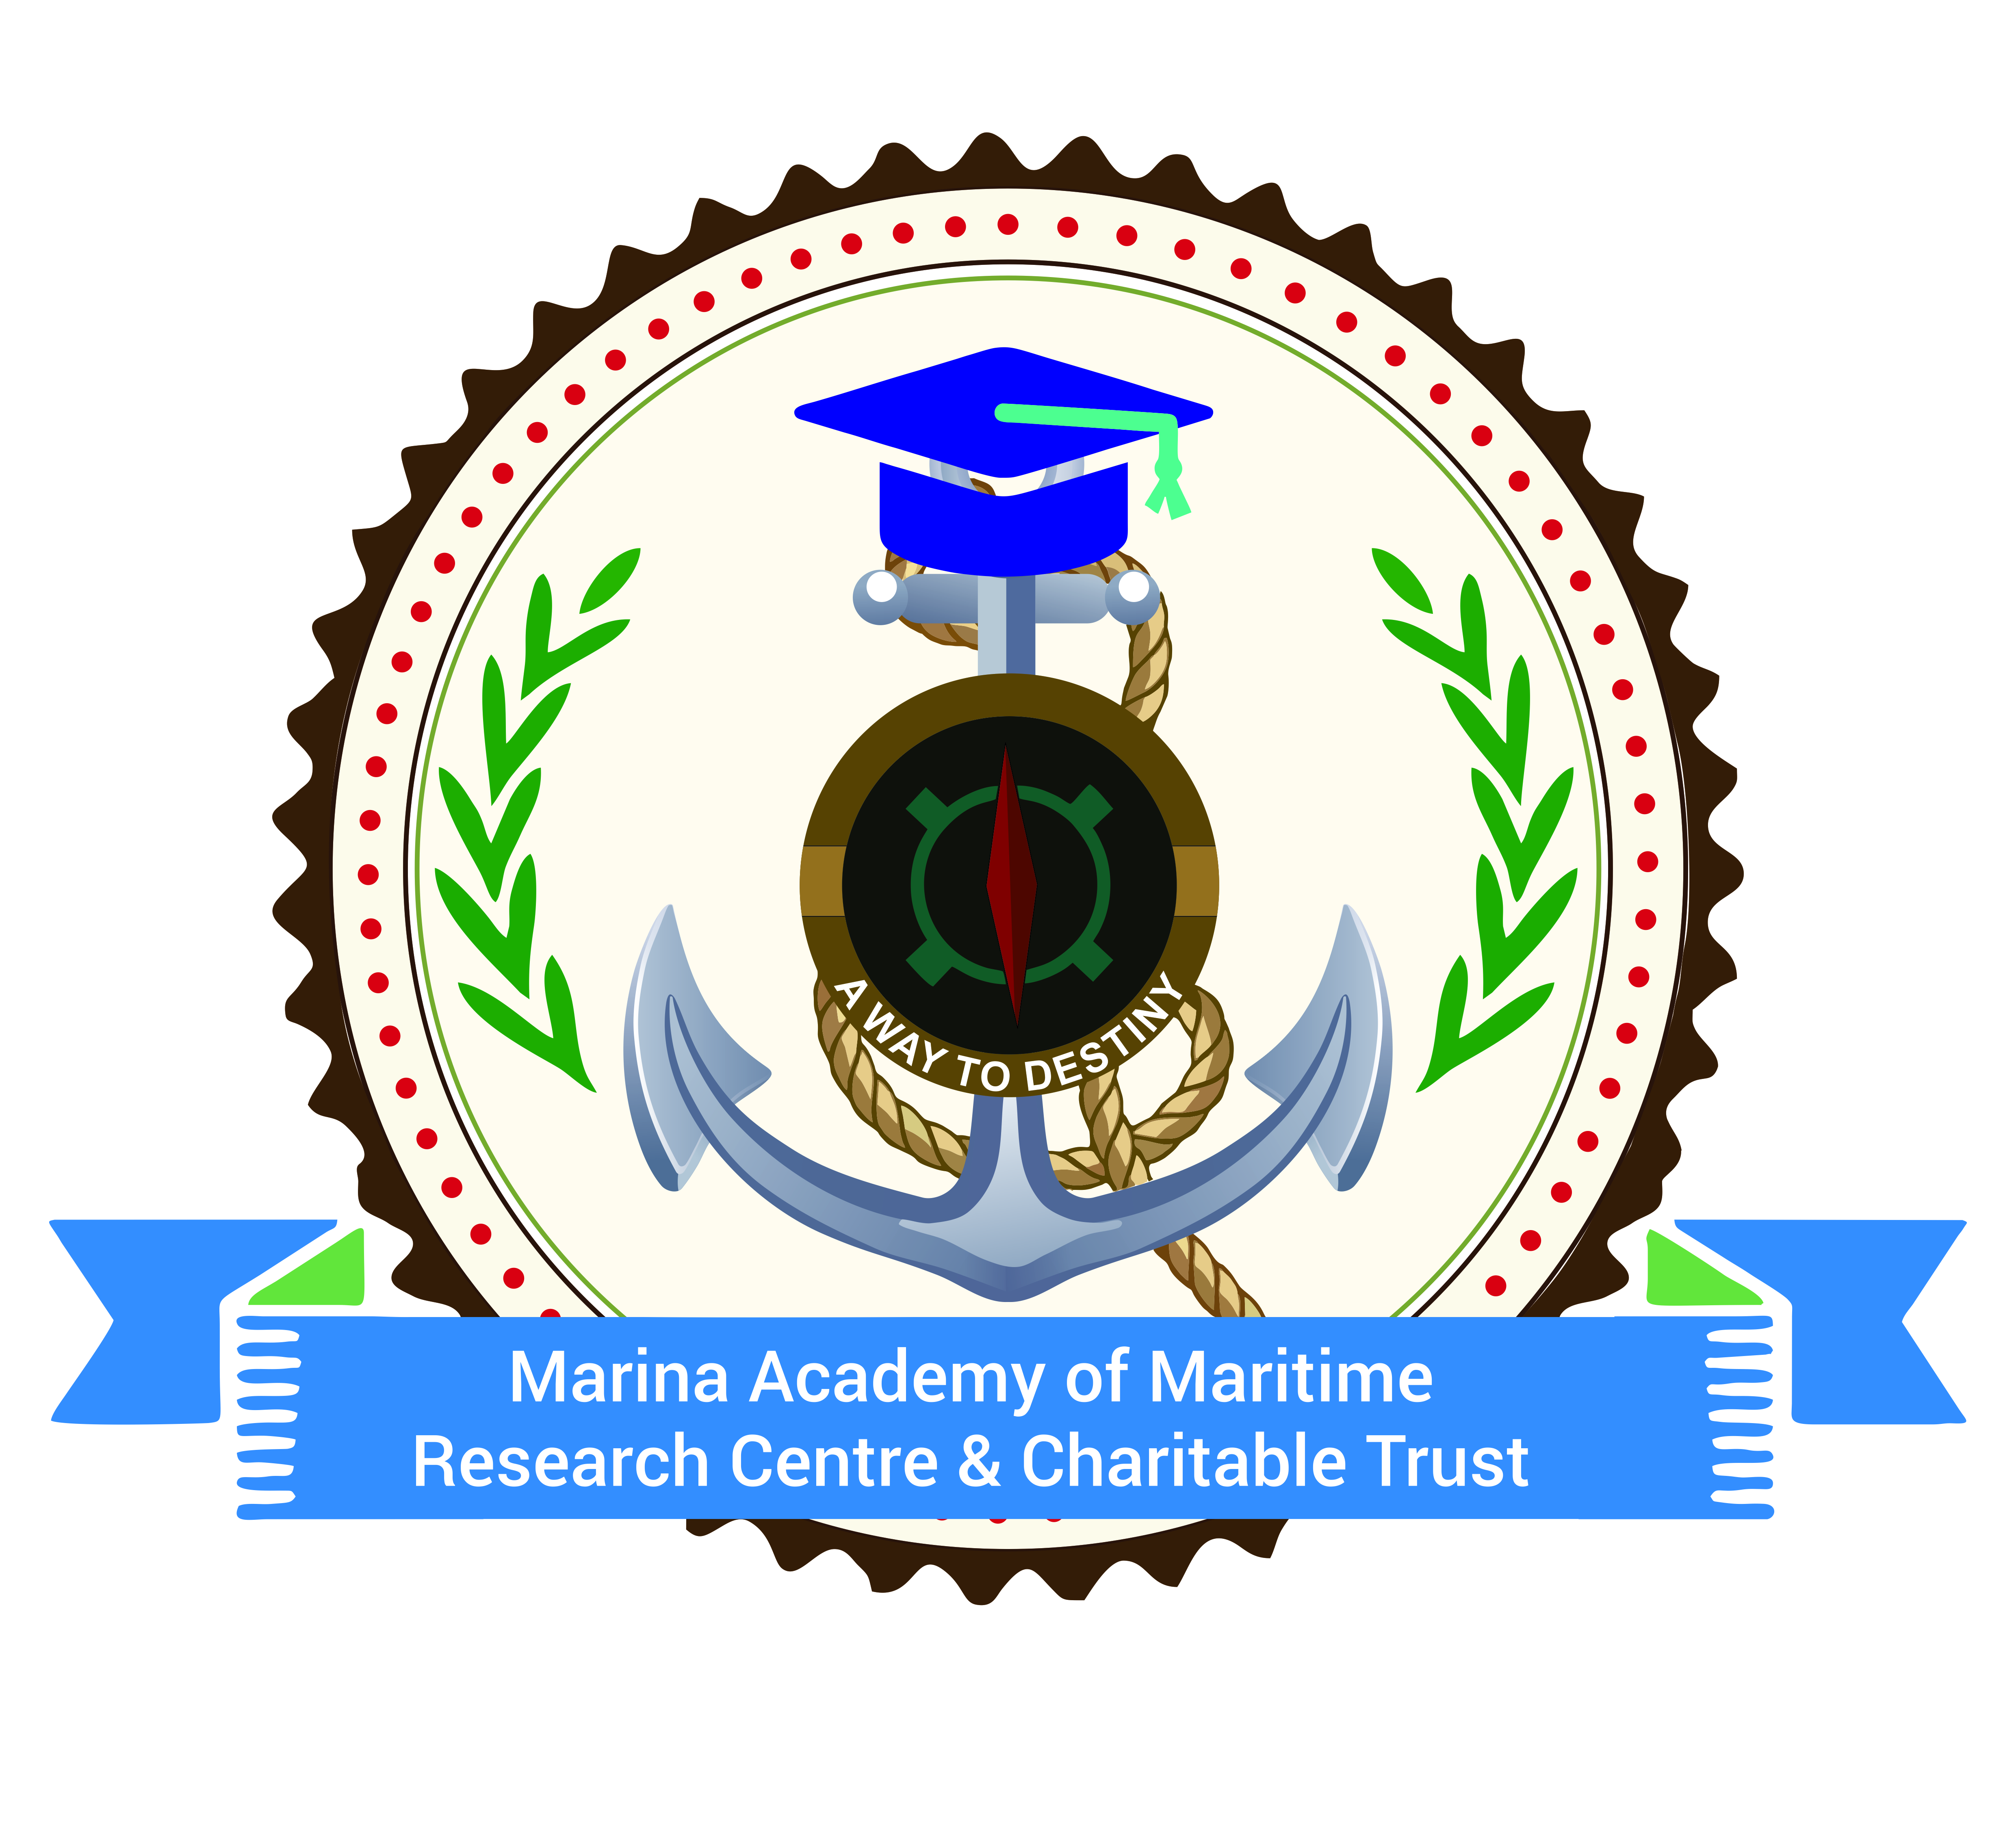 Marina Academy of Maritime Research Centre and Charitable Trust